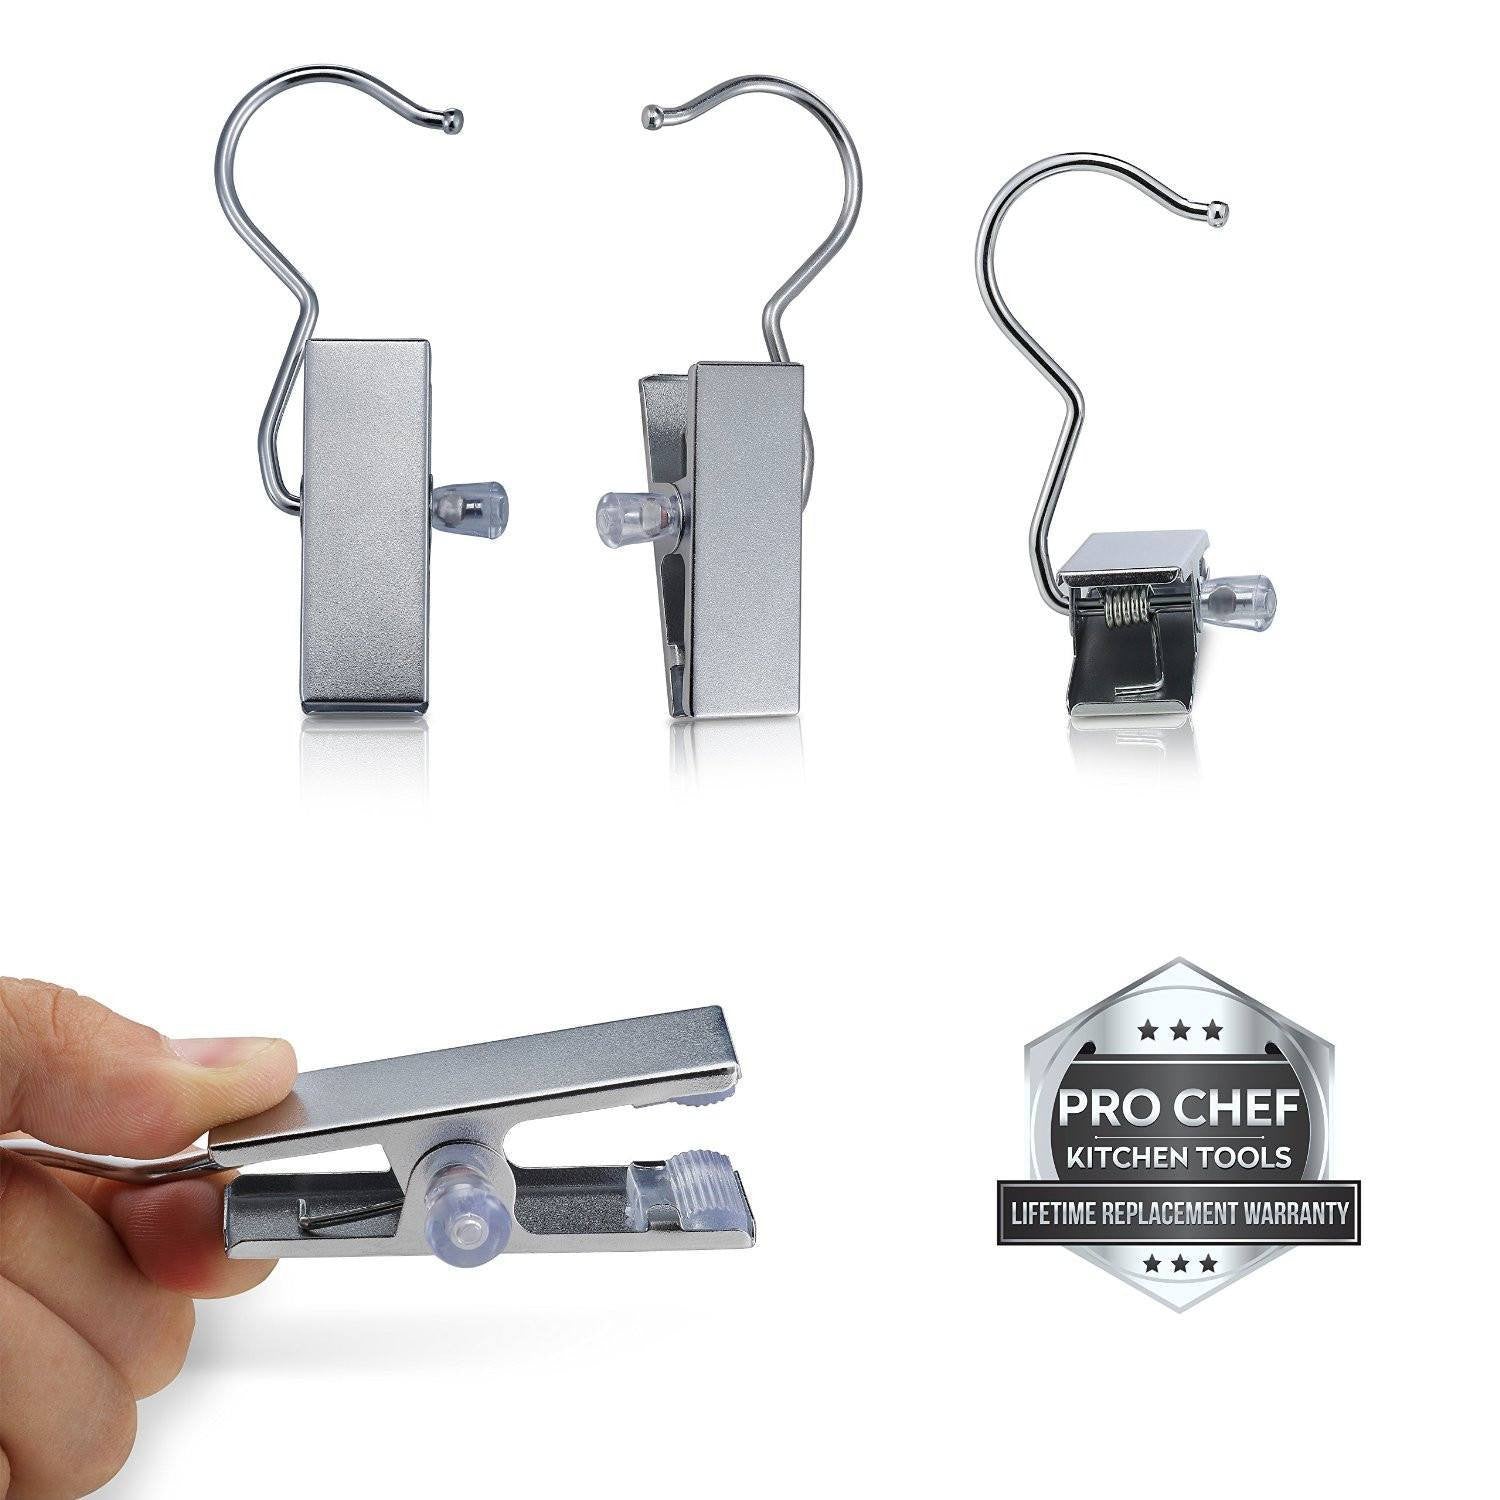 Buy now Pro Chef Kitchen Tools Stainless Steel Hanging Clip Hook